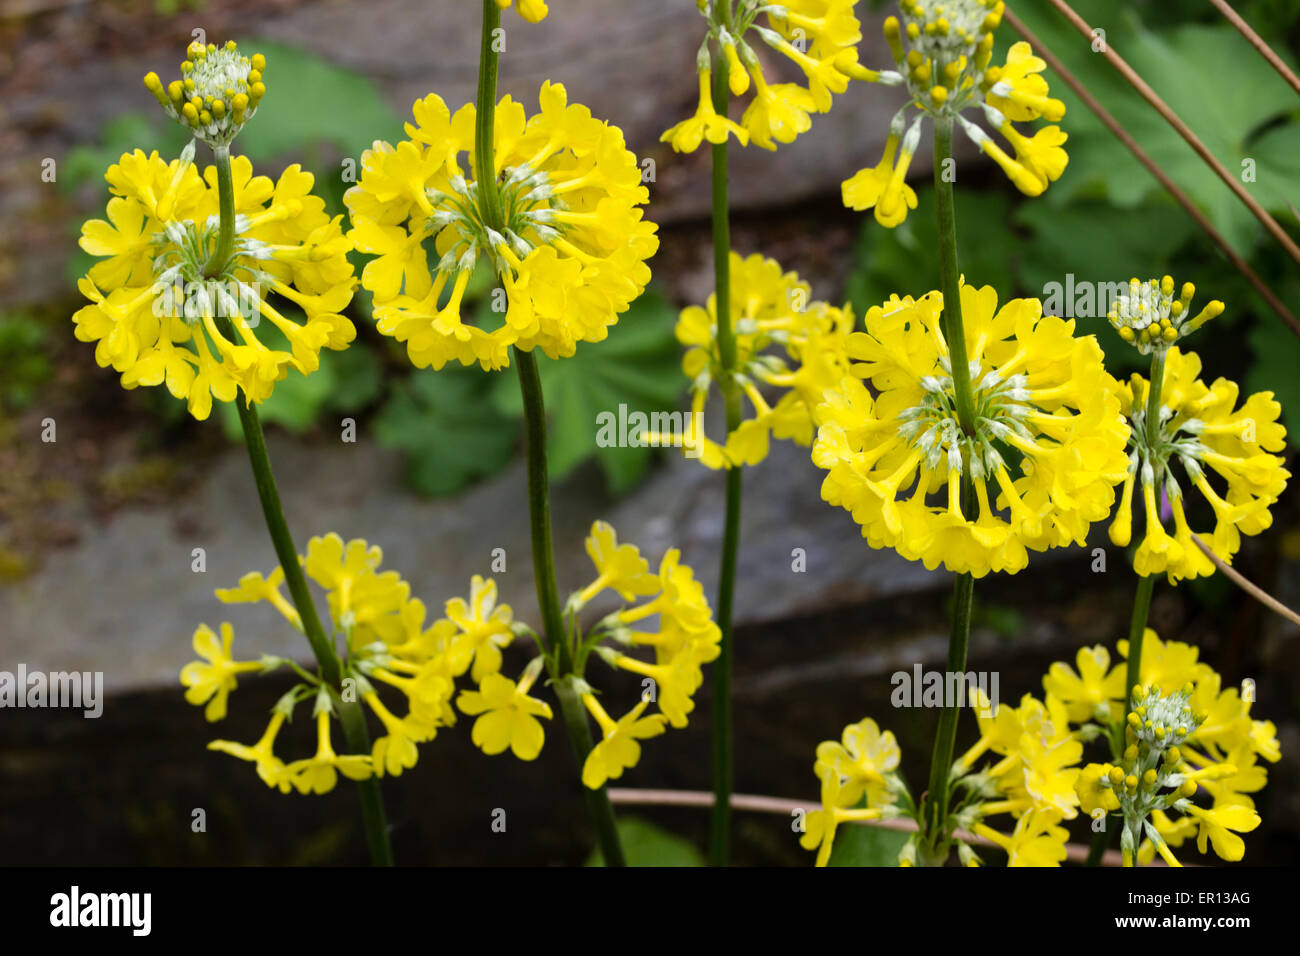 Overhead view looking down on the flower whorls of the candelabra Primula helodoxa Stock Photo